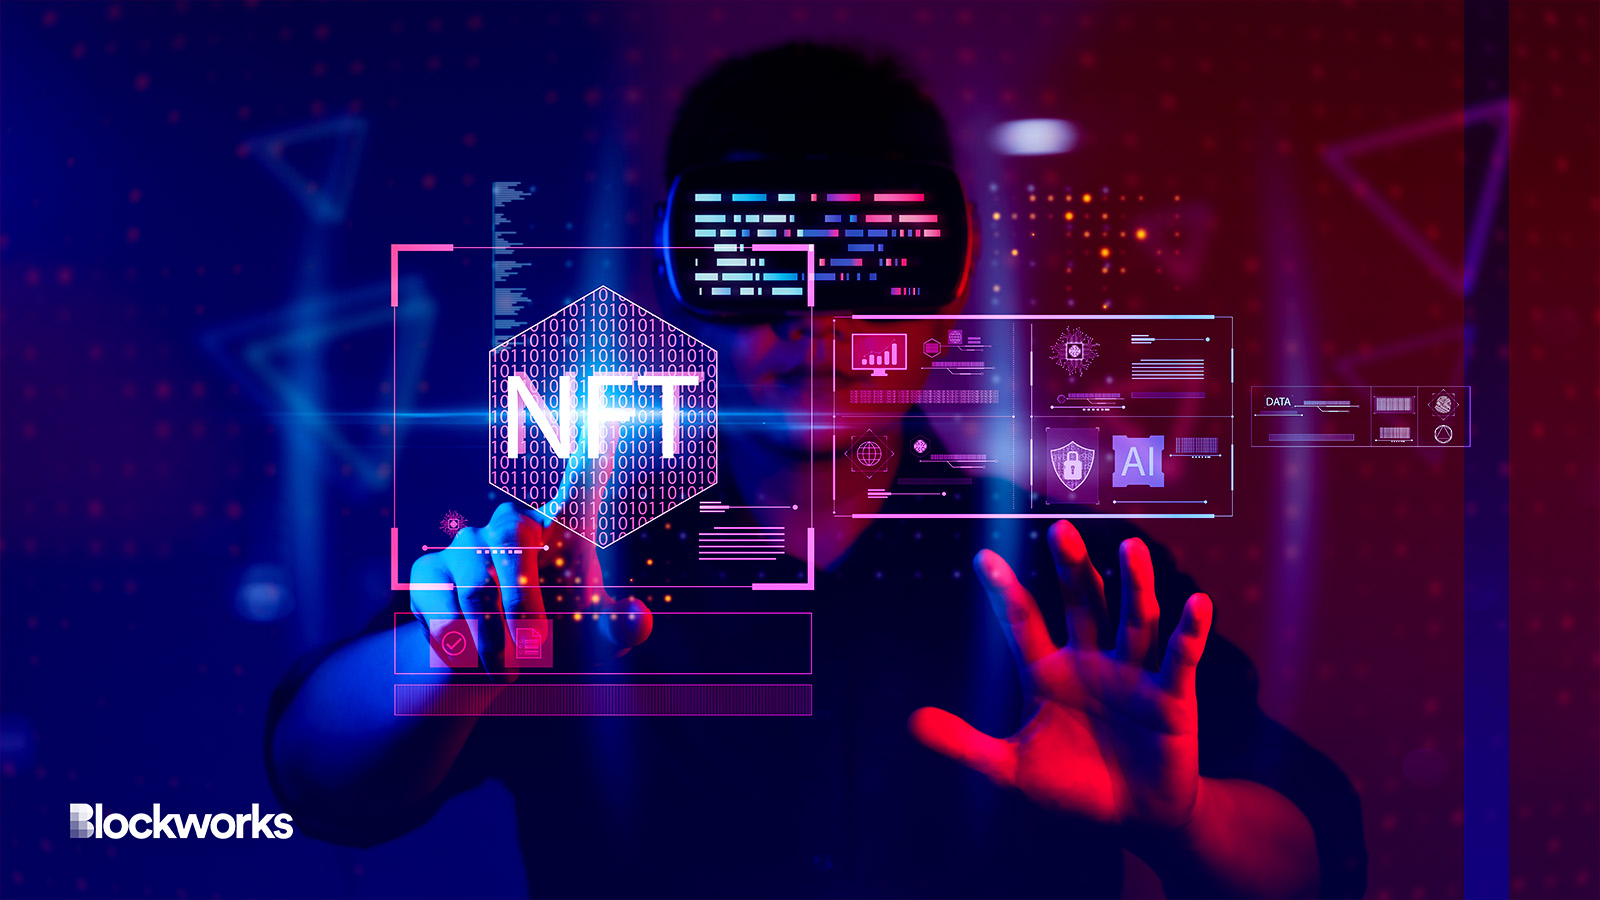 A Complete Guide to Making an NFT Marketplace for Digital Collectibles in  2023 - Play to Earn Games News